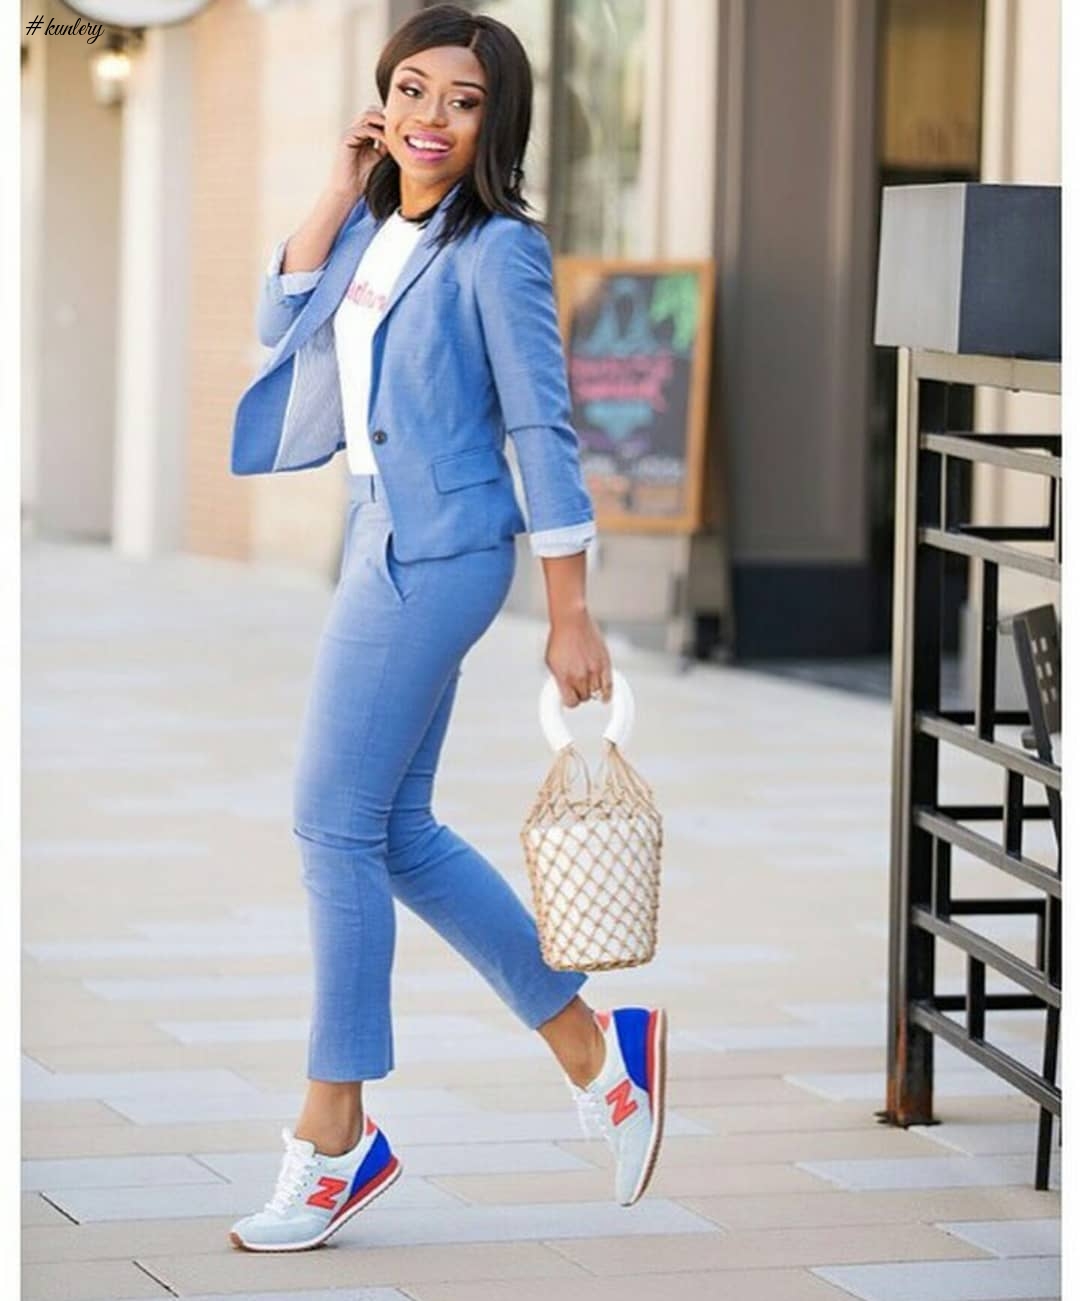 STAND OUT IN STYLISH CORPORATE ATTIRES THIS WEEK TO WORK